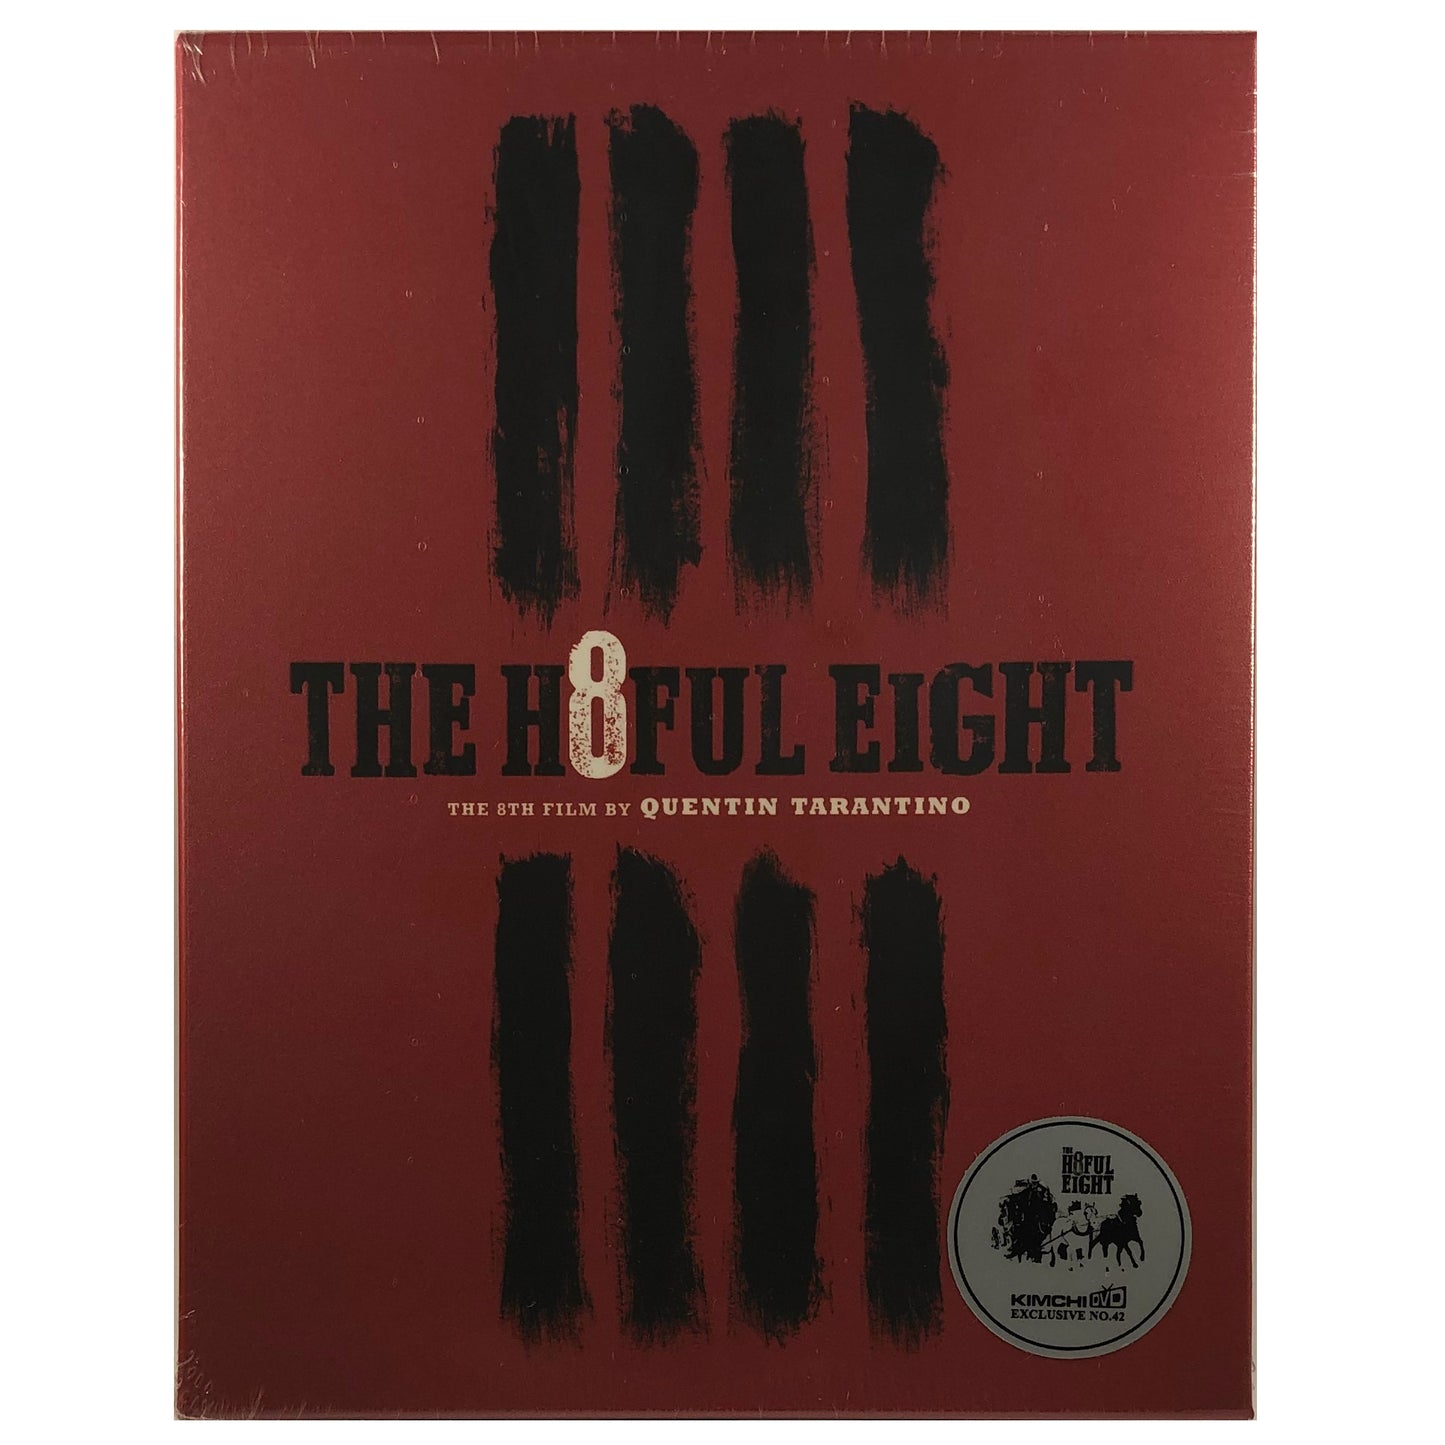 The Hateful Eight Scanavo Fullslip Blu-Ray - Limited Edition - KimchiDVD Exclusive #42